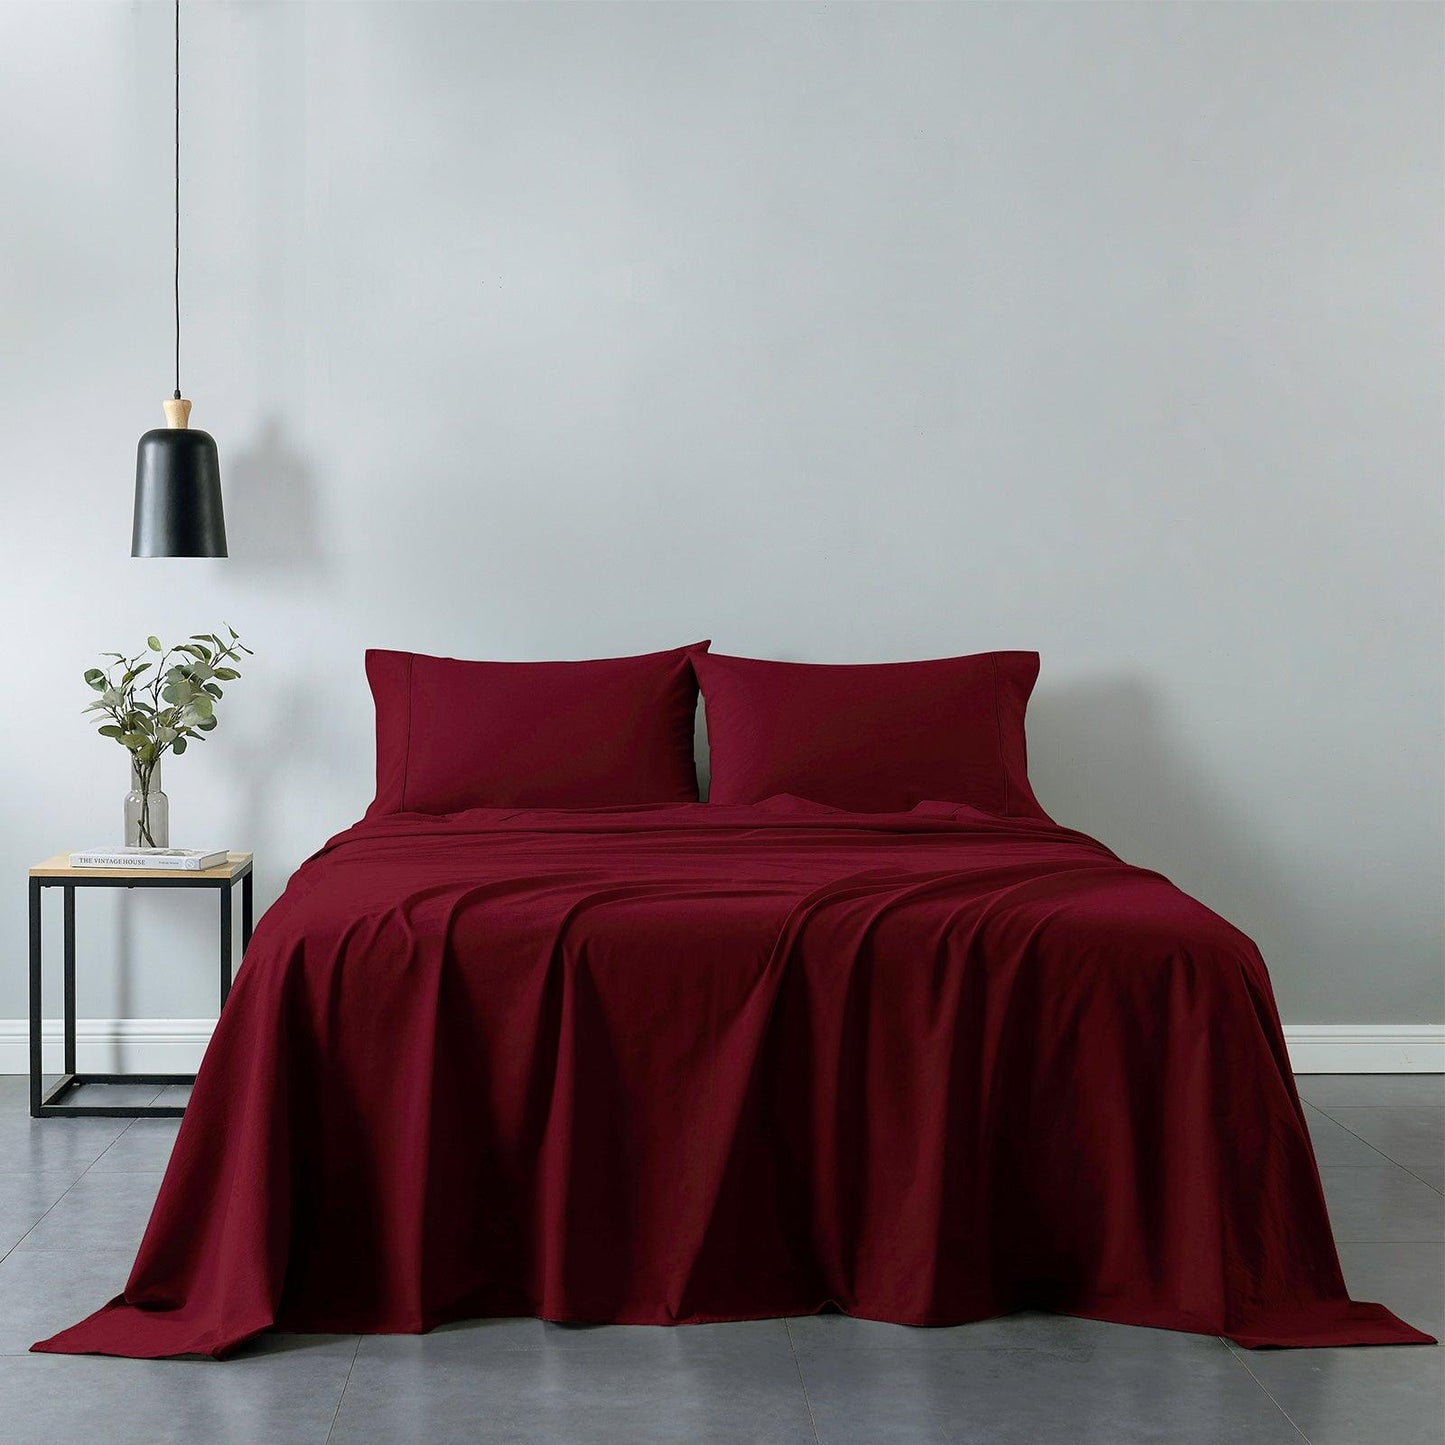 Royal Comfort Vintage Washed 100% Cotton Sheet Set Fitted Flat Sheet Pillowcases - Single - Mulled Wine